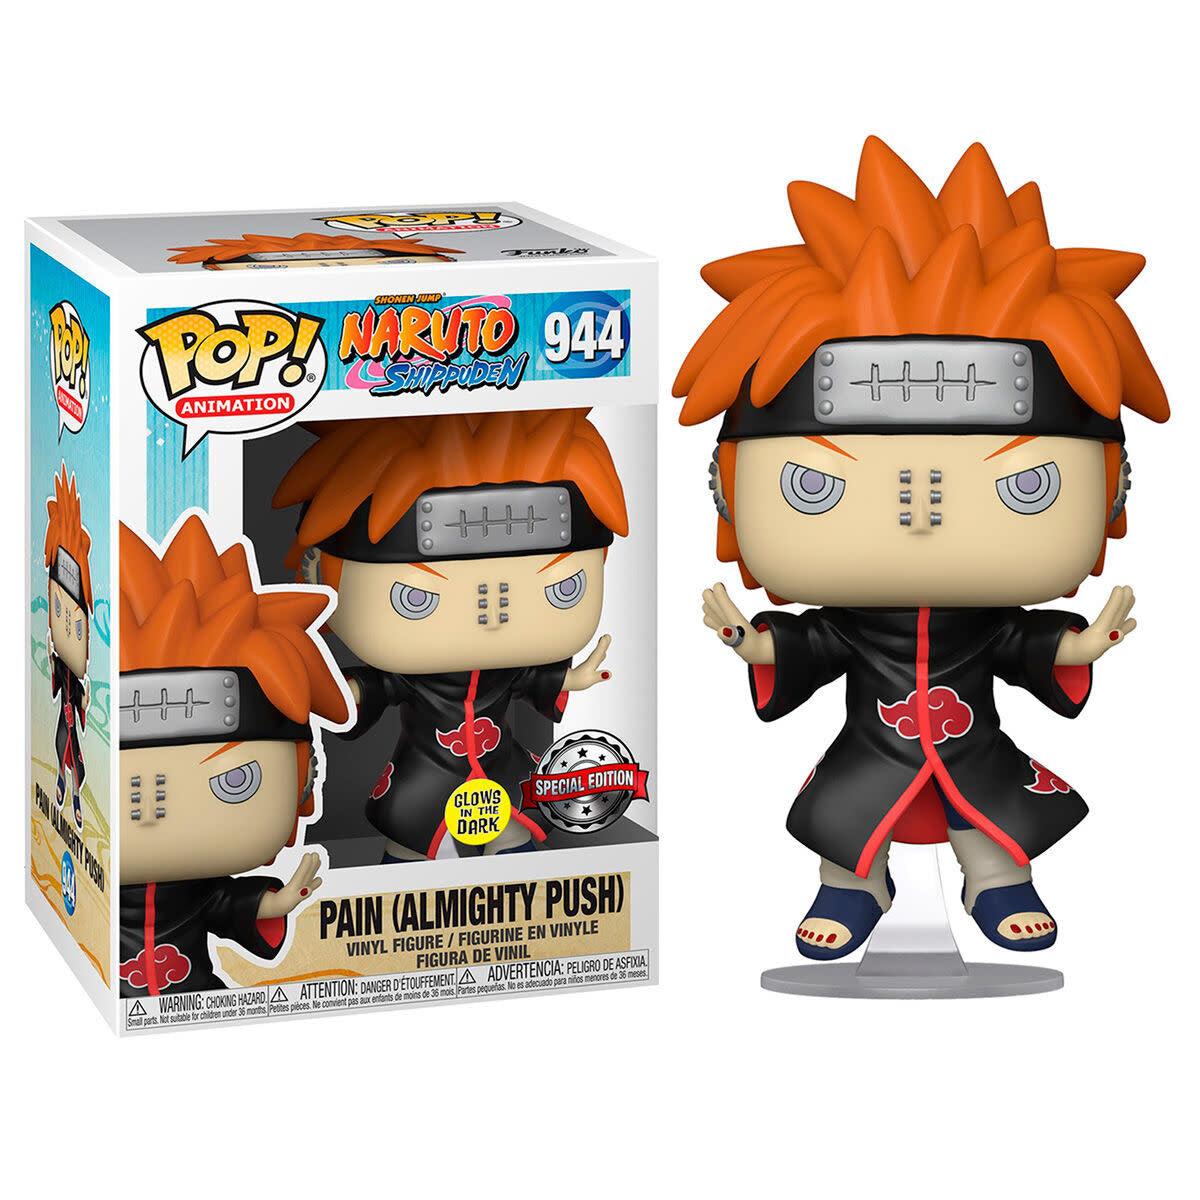 Pop! Animation - Naruto - Pain (Almighty Push) - #944 - Glow In The Dark & SPECIAL Edition - Hobby Champion Inc